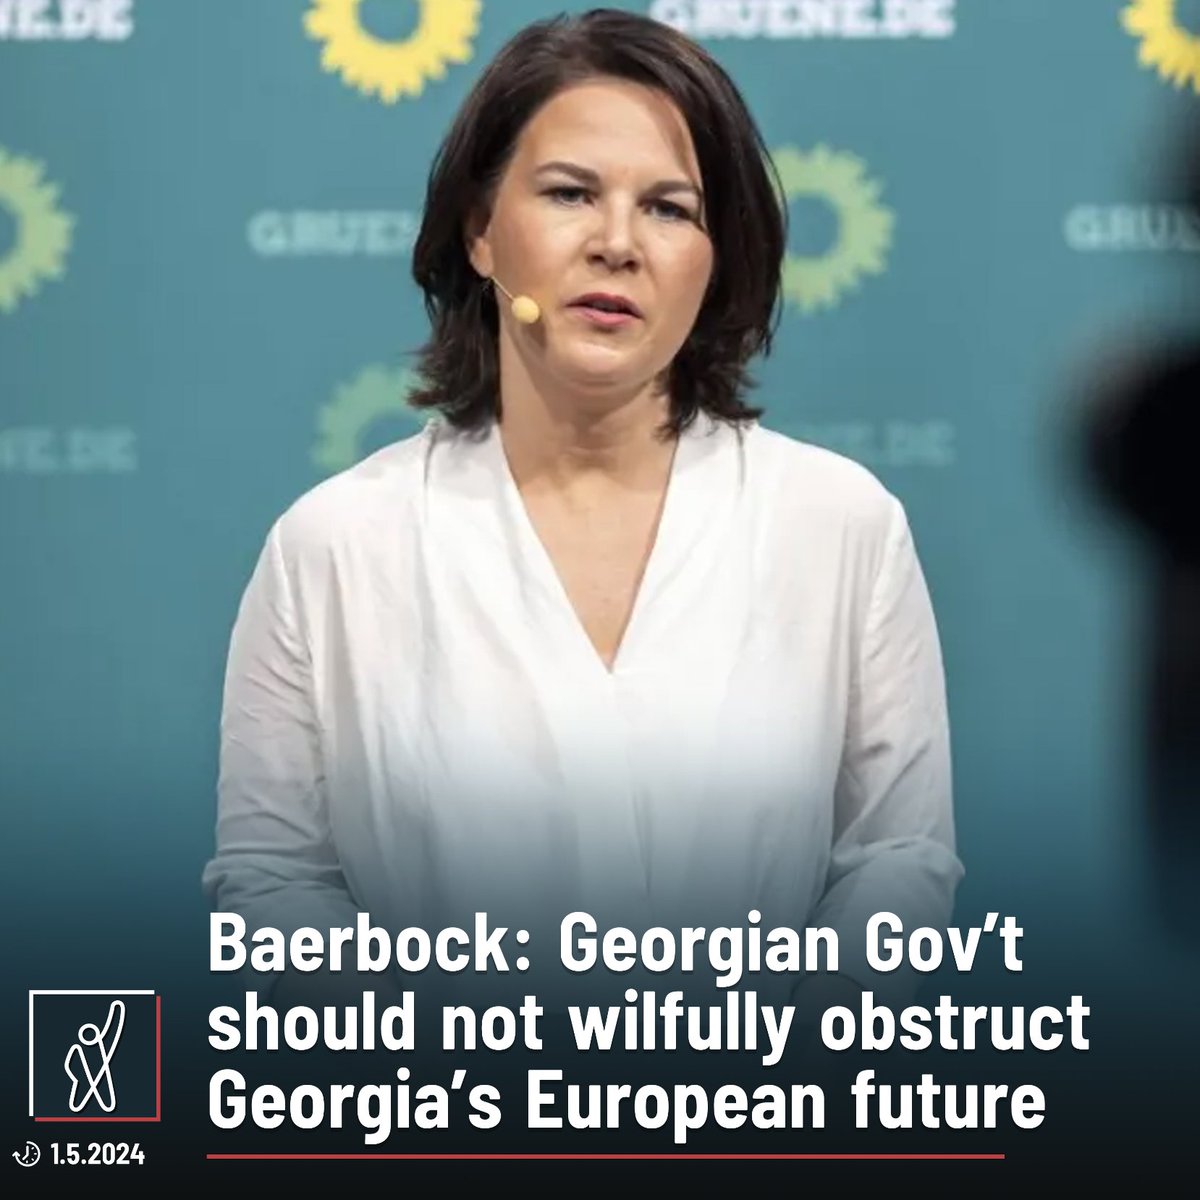 “Georgia's EU candidate status is a historic opportunity supported by tens of thousands of people on the streets. A democratic, vibrant and critical civil society is key. It is up to the government not to wilfully obstruct the path to the future,” @ABaerbock stated.